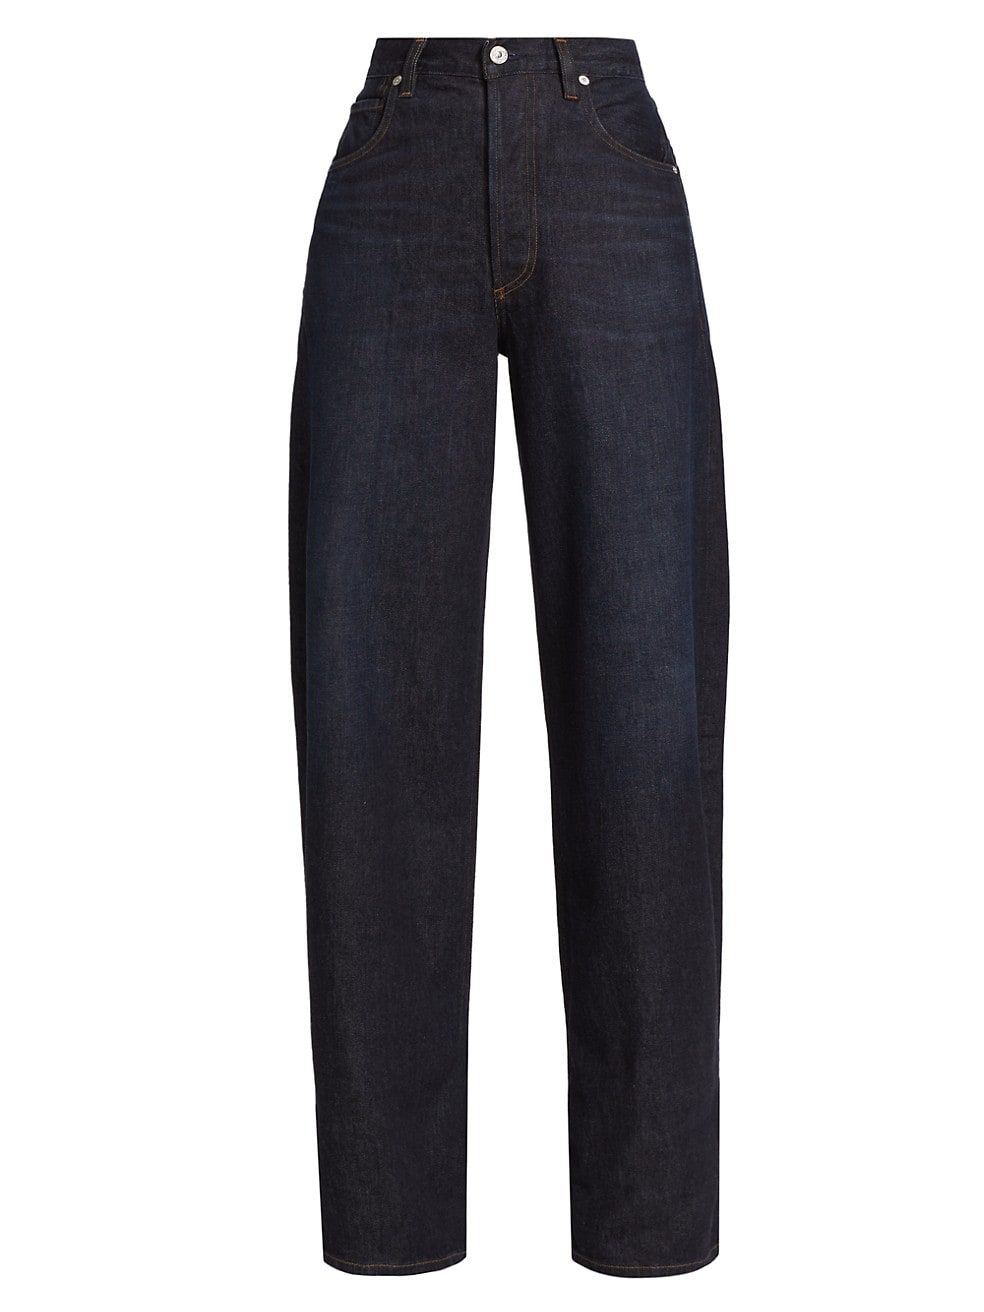 Citizens of Humanity Ayla Baggy Jeans | Saks Fifth Avenue